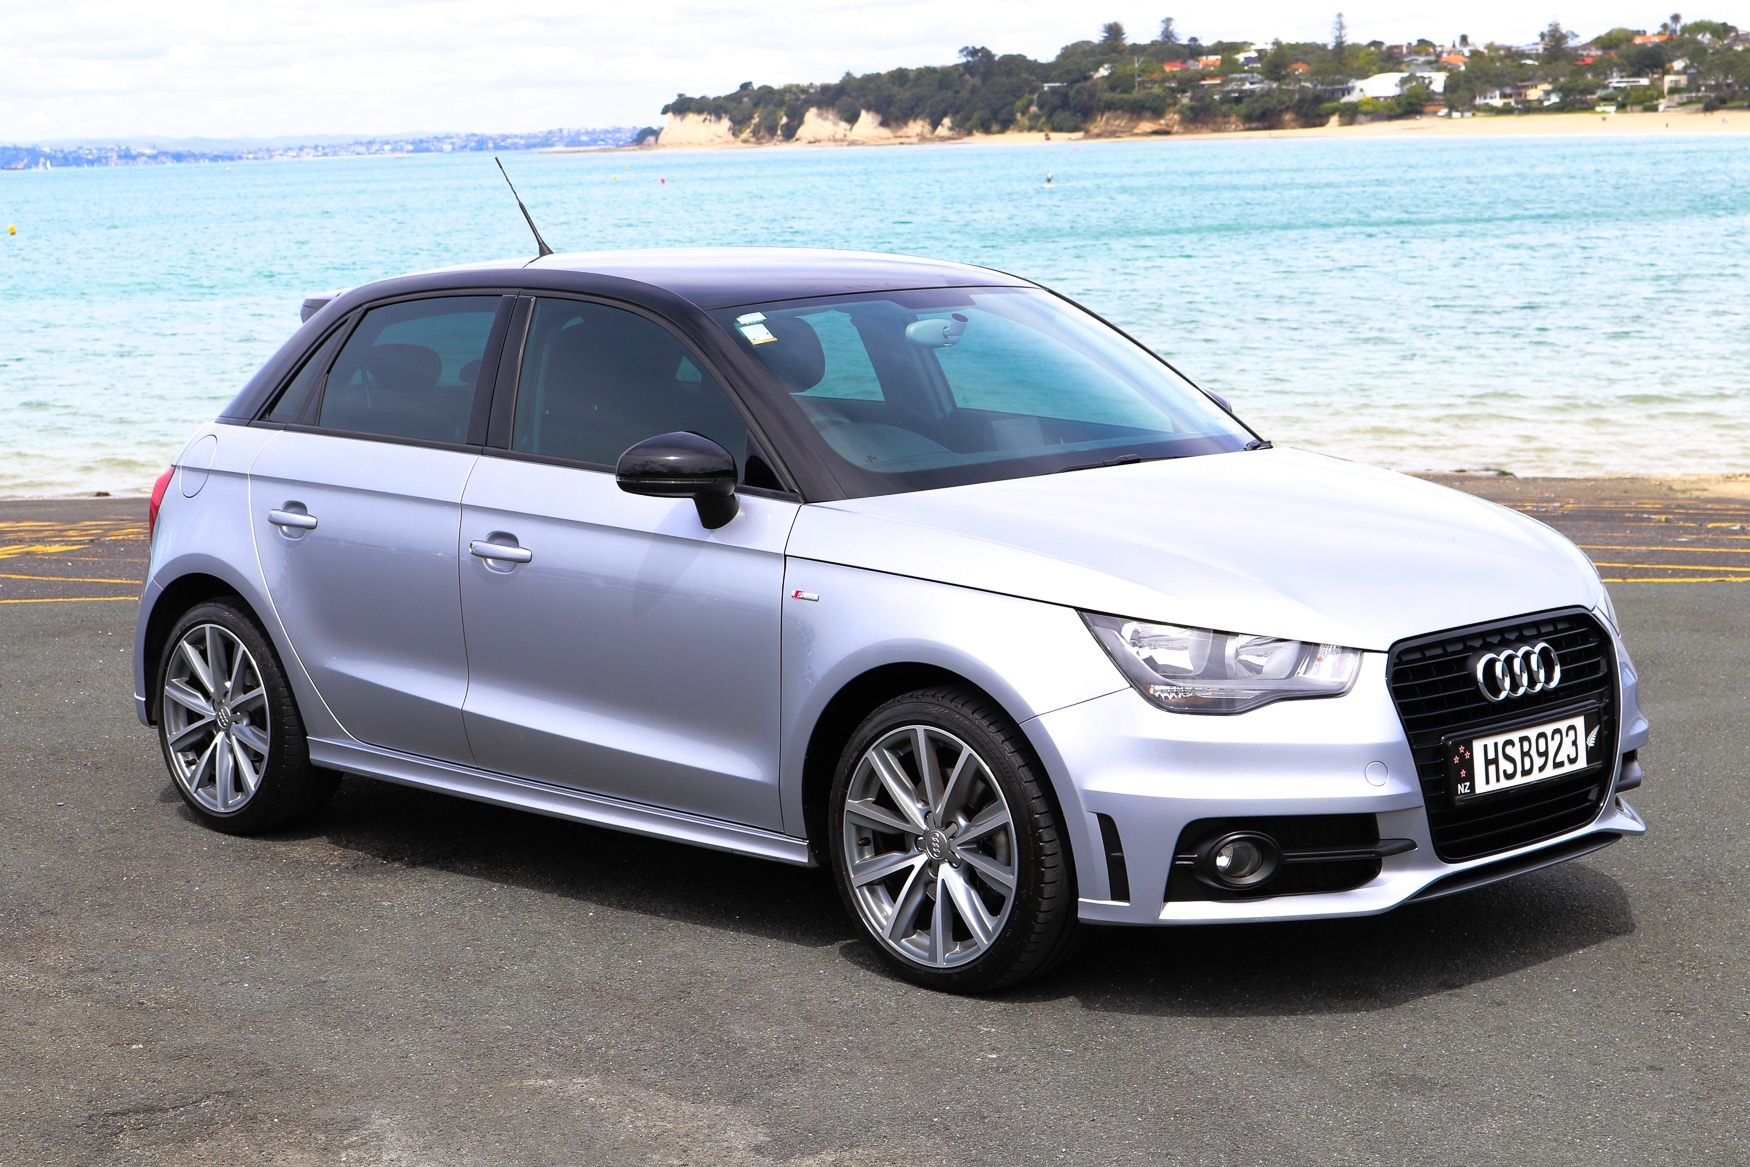 2014 Audi A1 1.4 TFSI S-Line - Yesterday's Legends